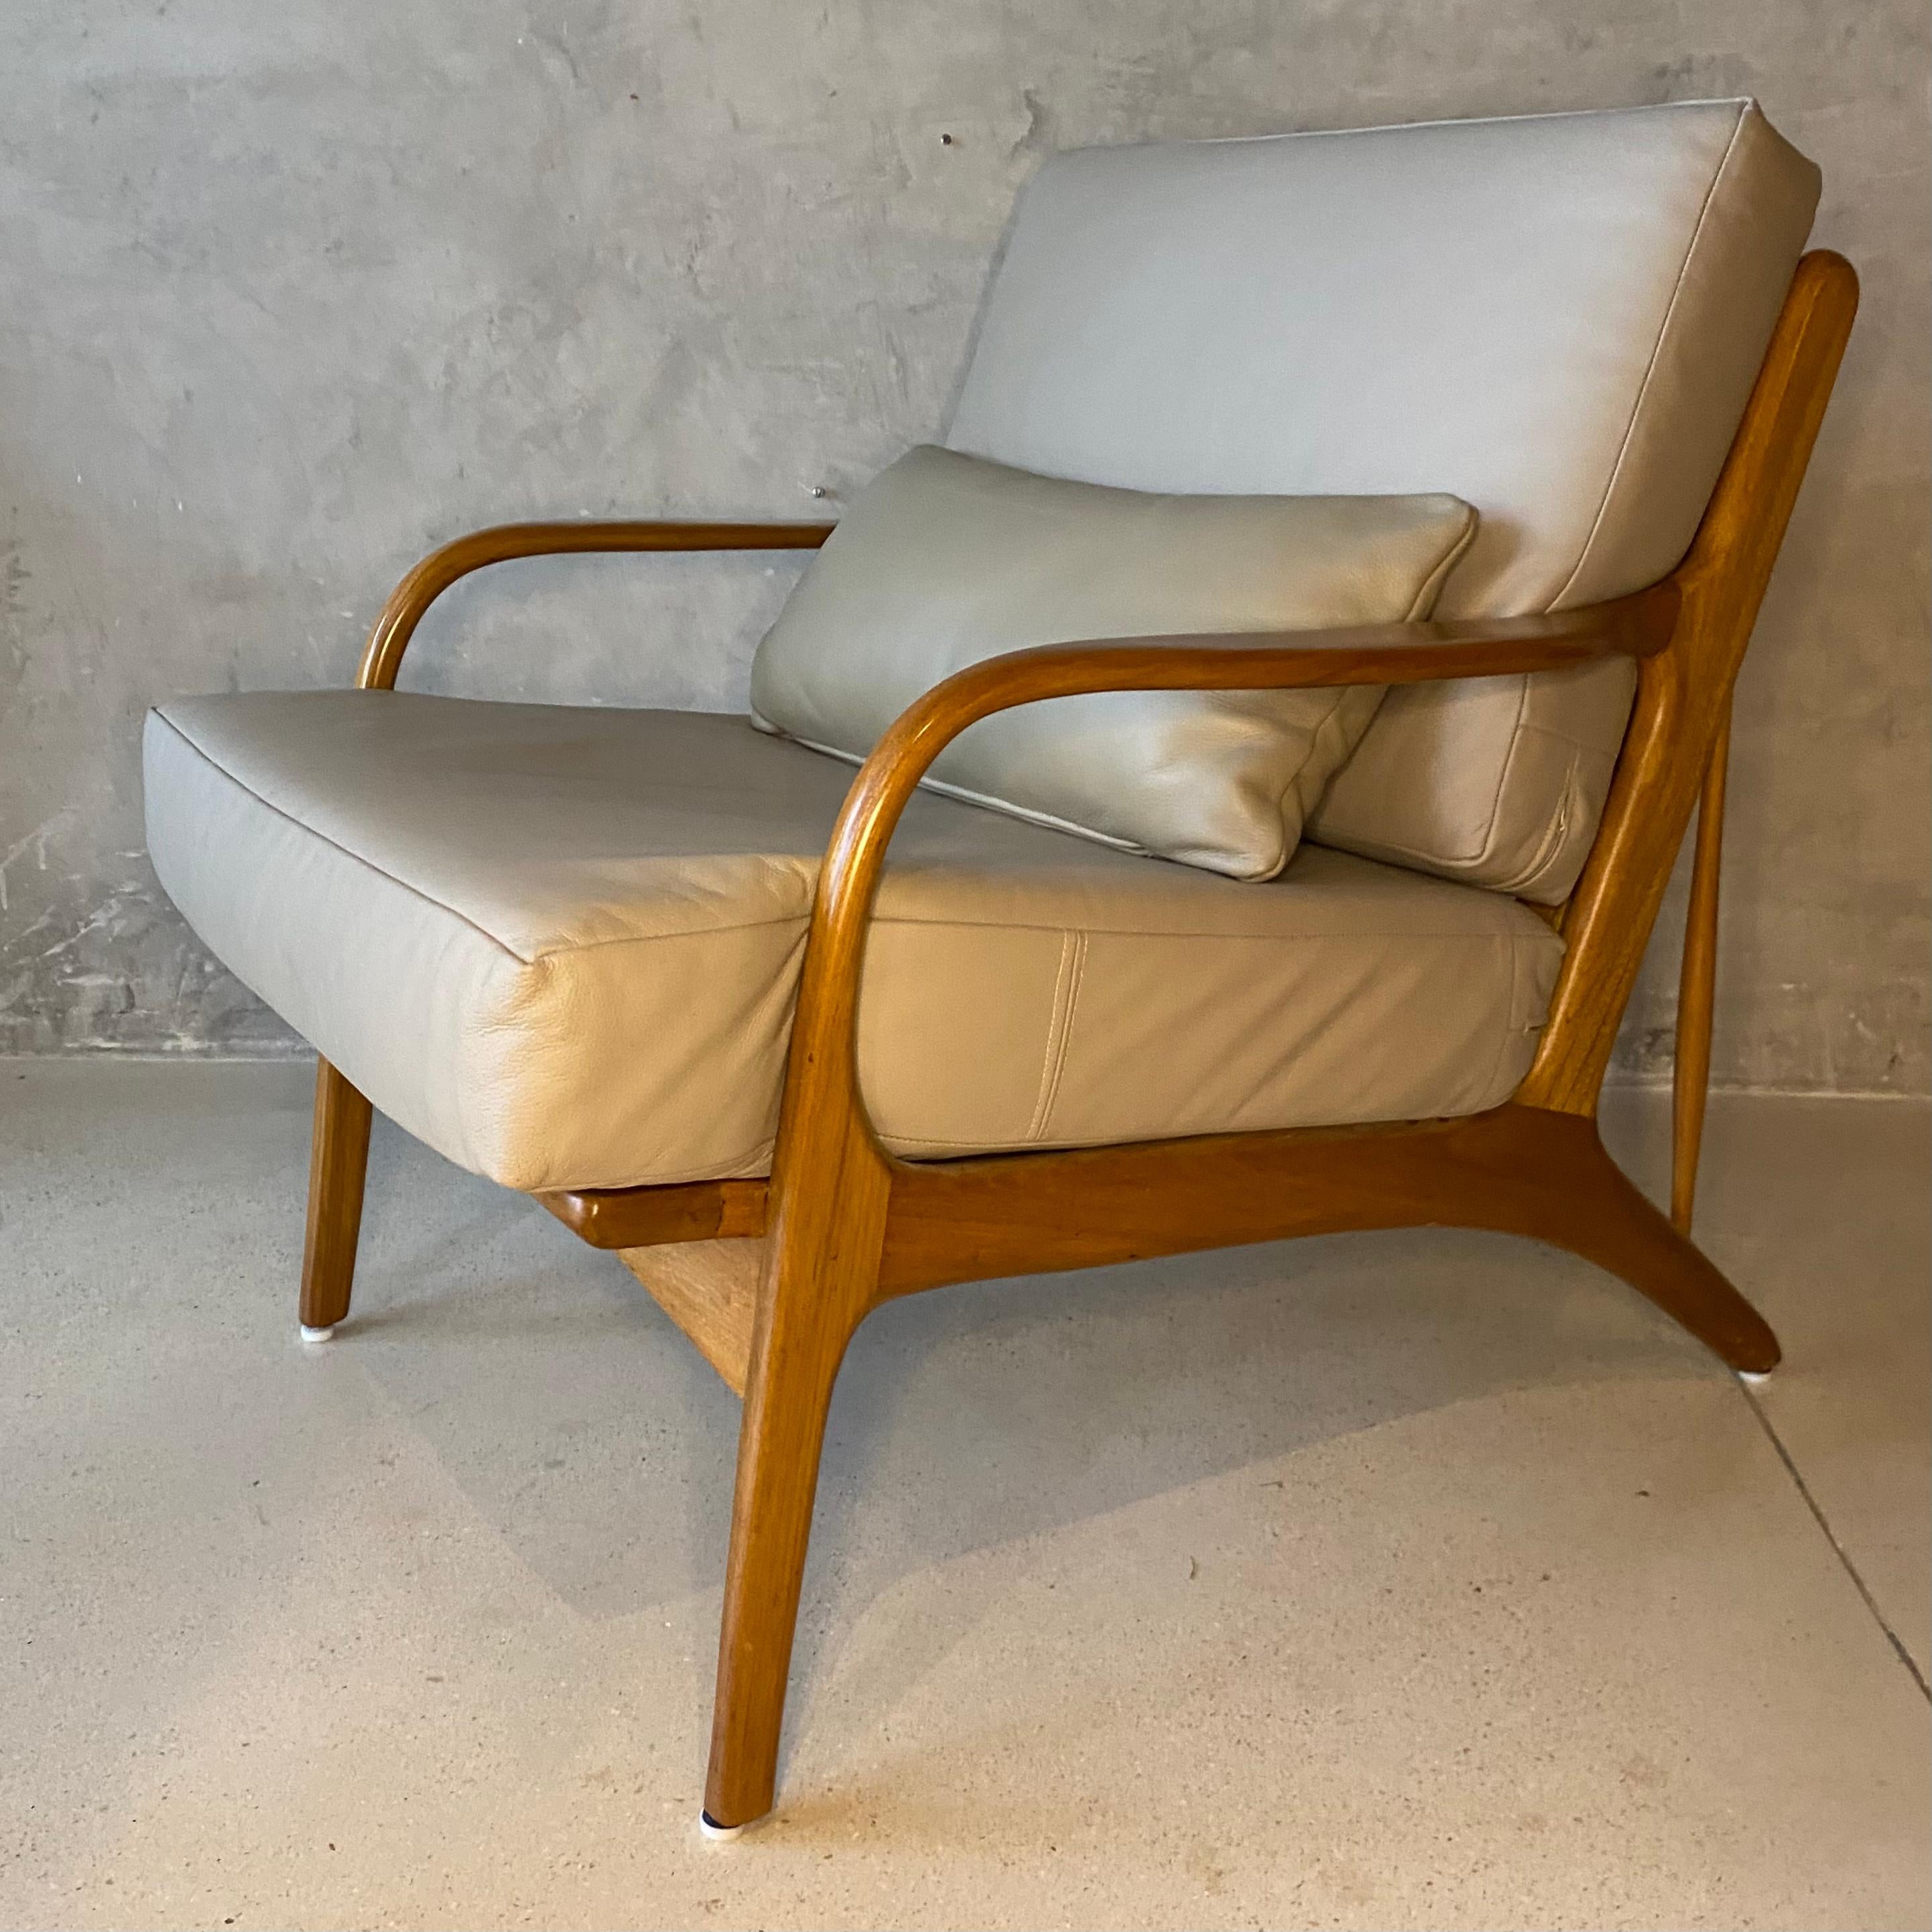 Mexican Midcentury Lounge Chair, “Malinche“, 1950s For Sale 3